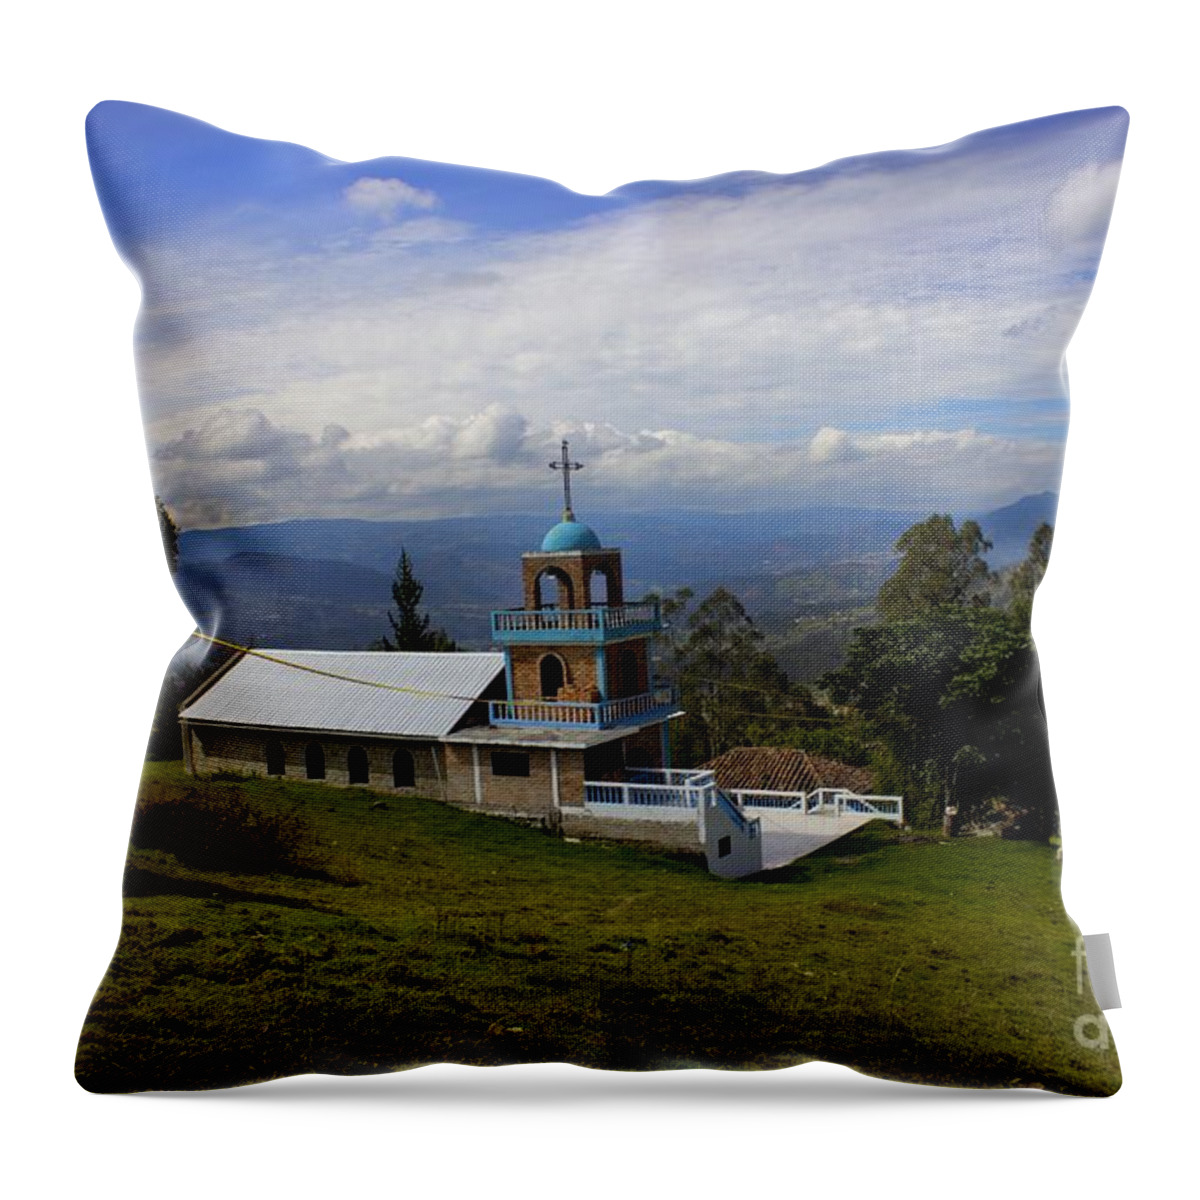 Country Throw Pillow featuring the photograph Lovely Church On Cojitambo by Al Bourassa